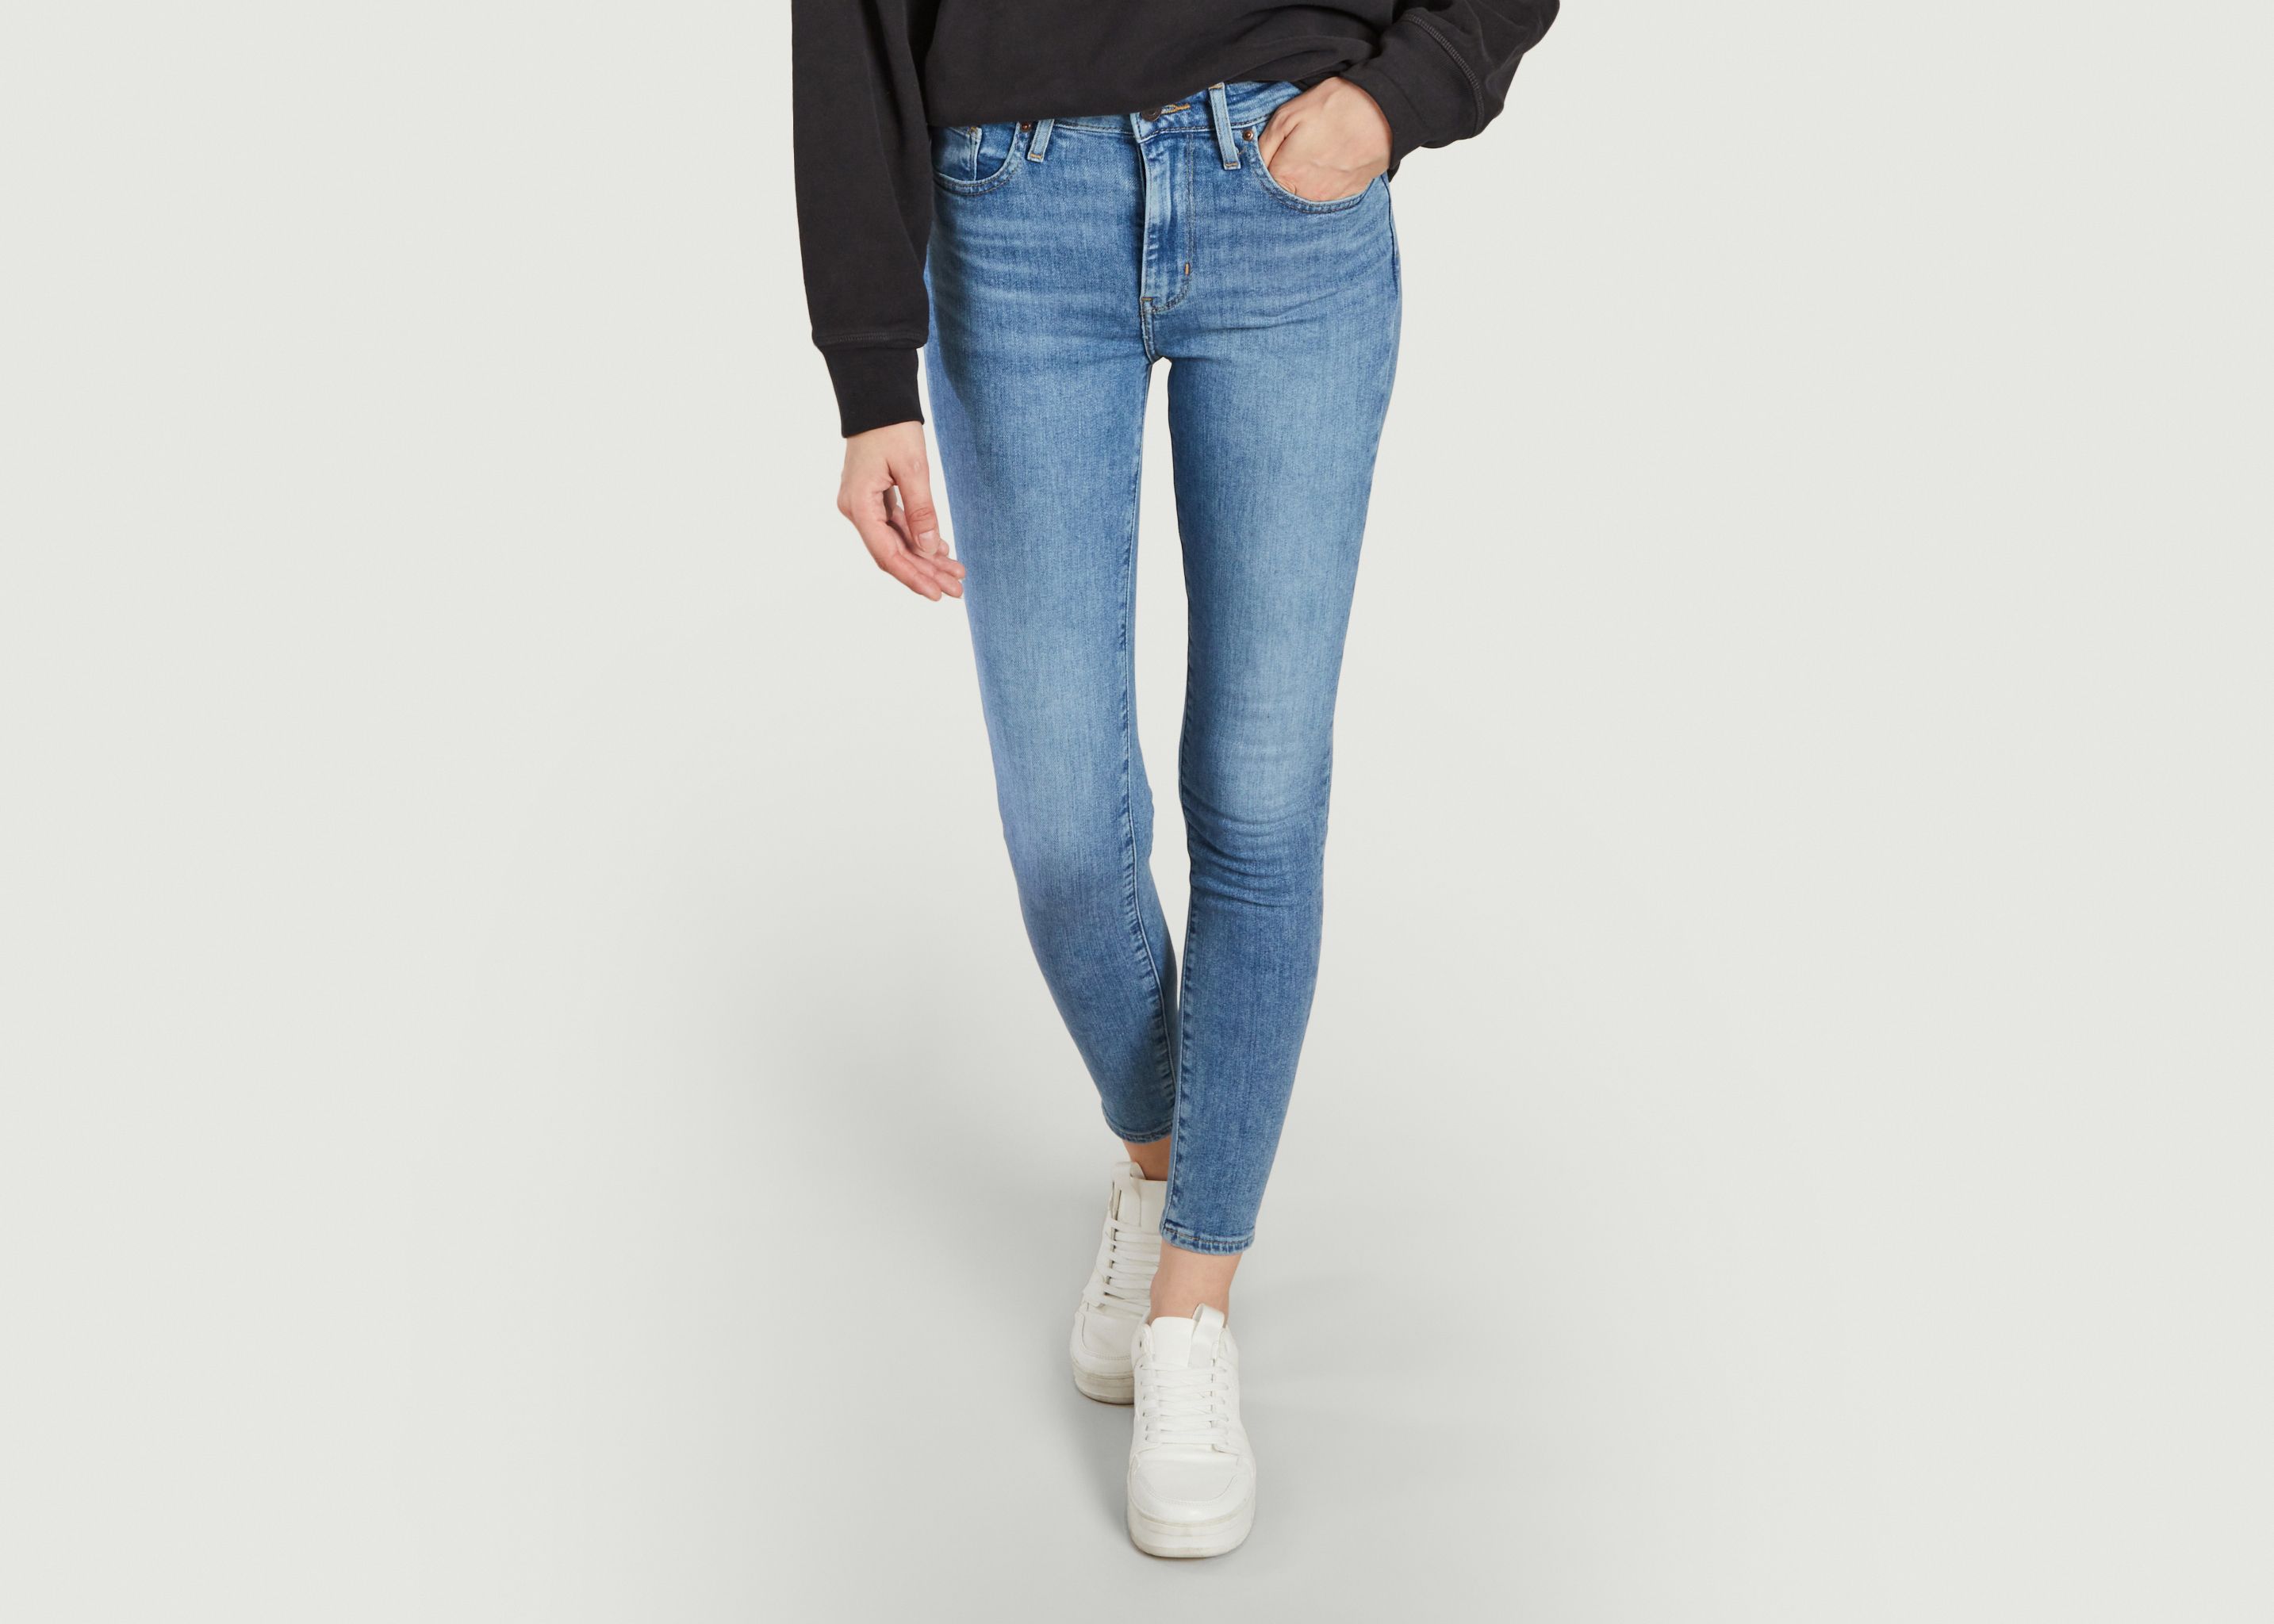 721 High Rise Skinny Jeans - Levi's Red Tab